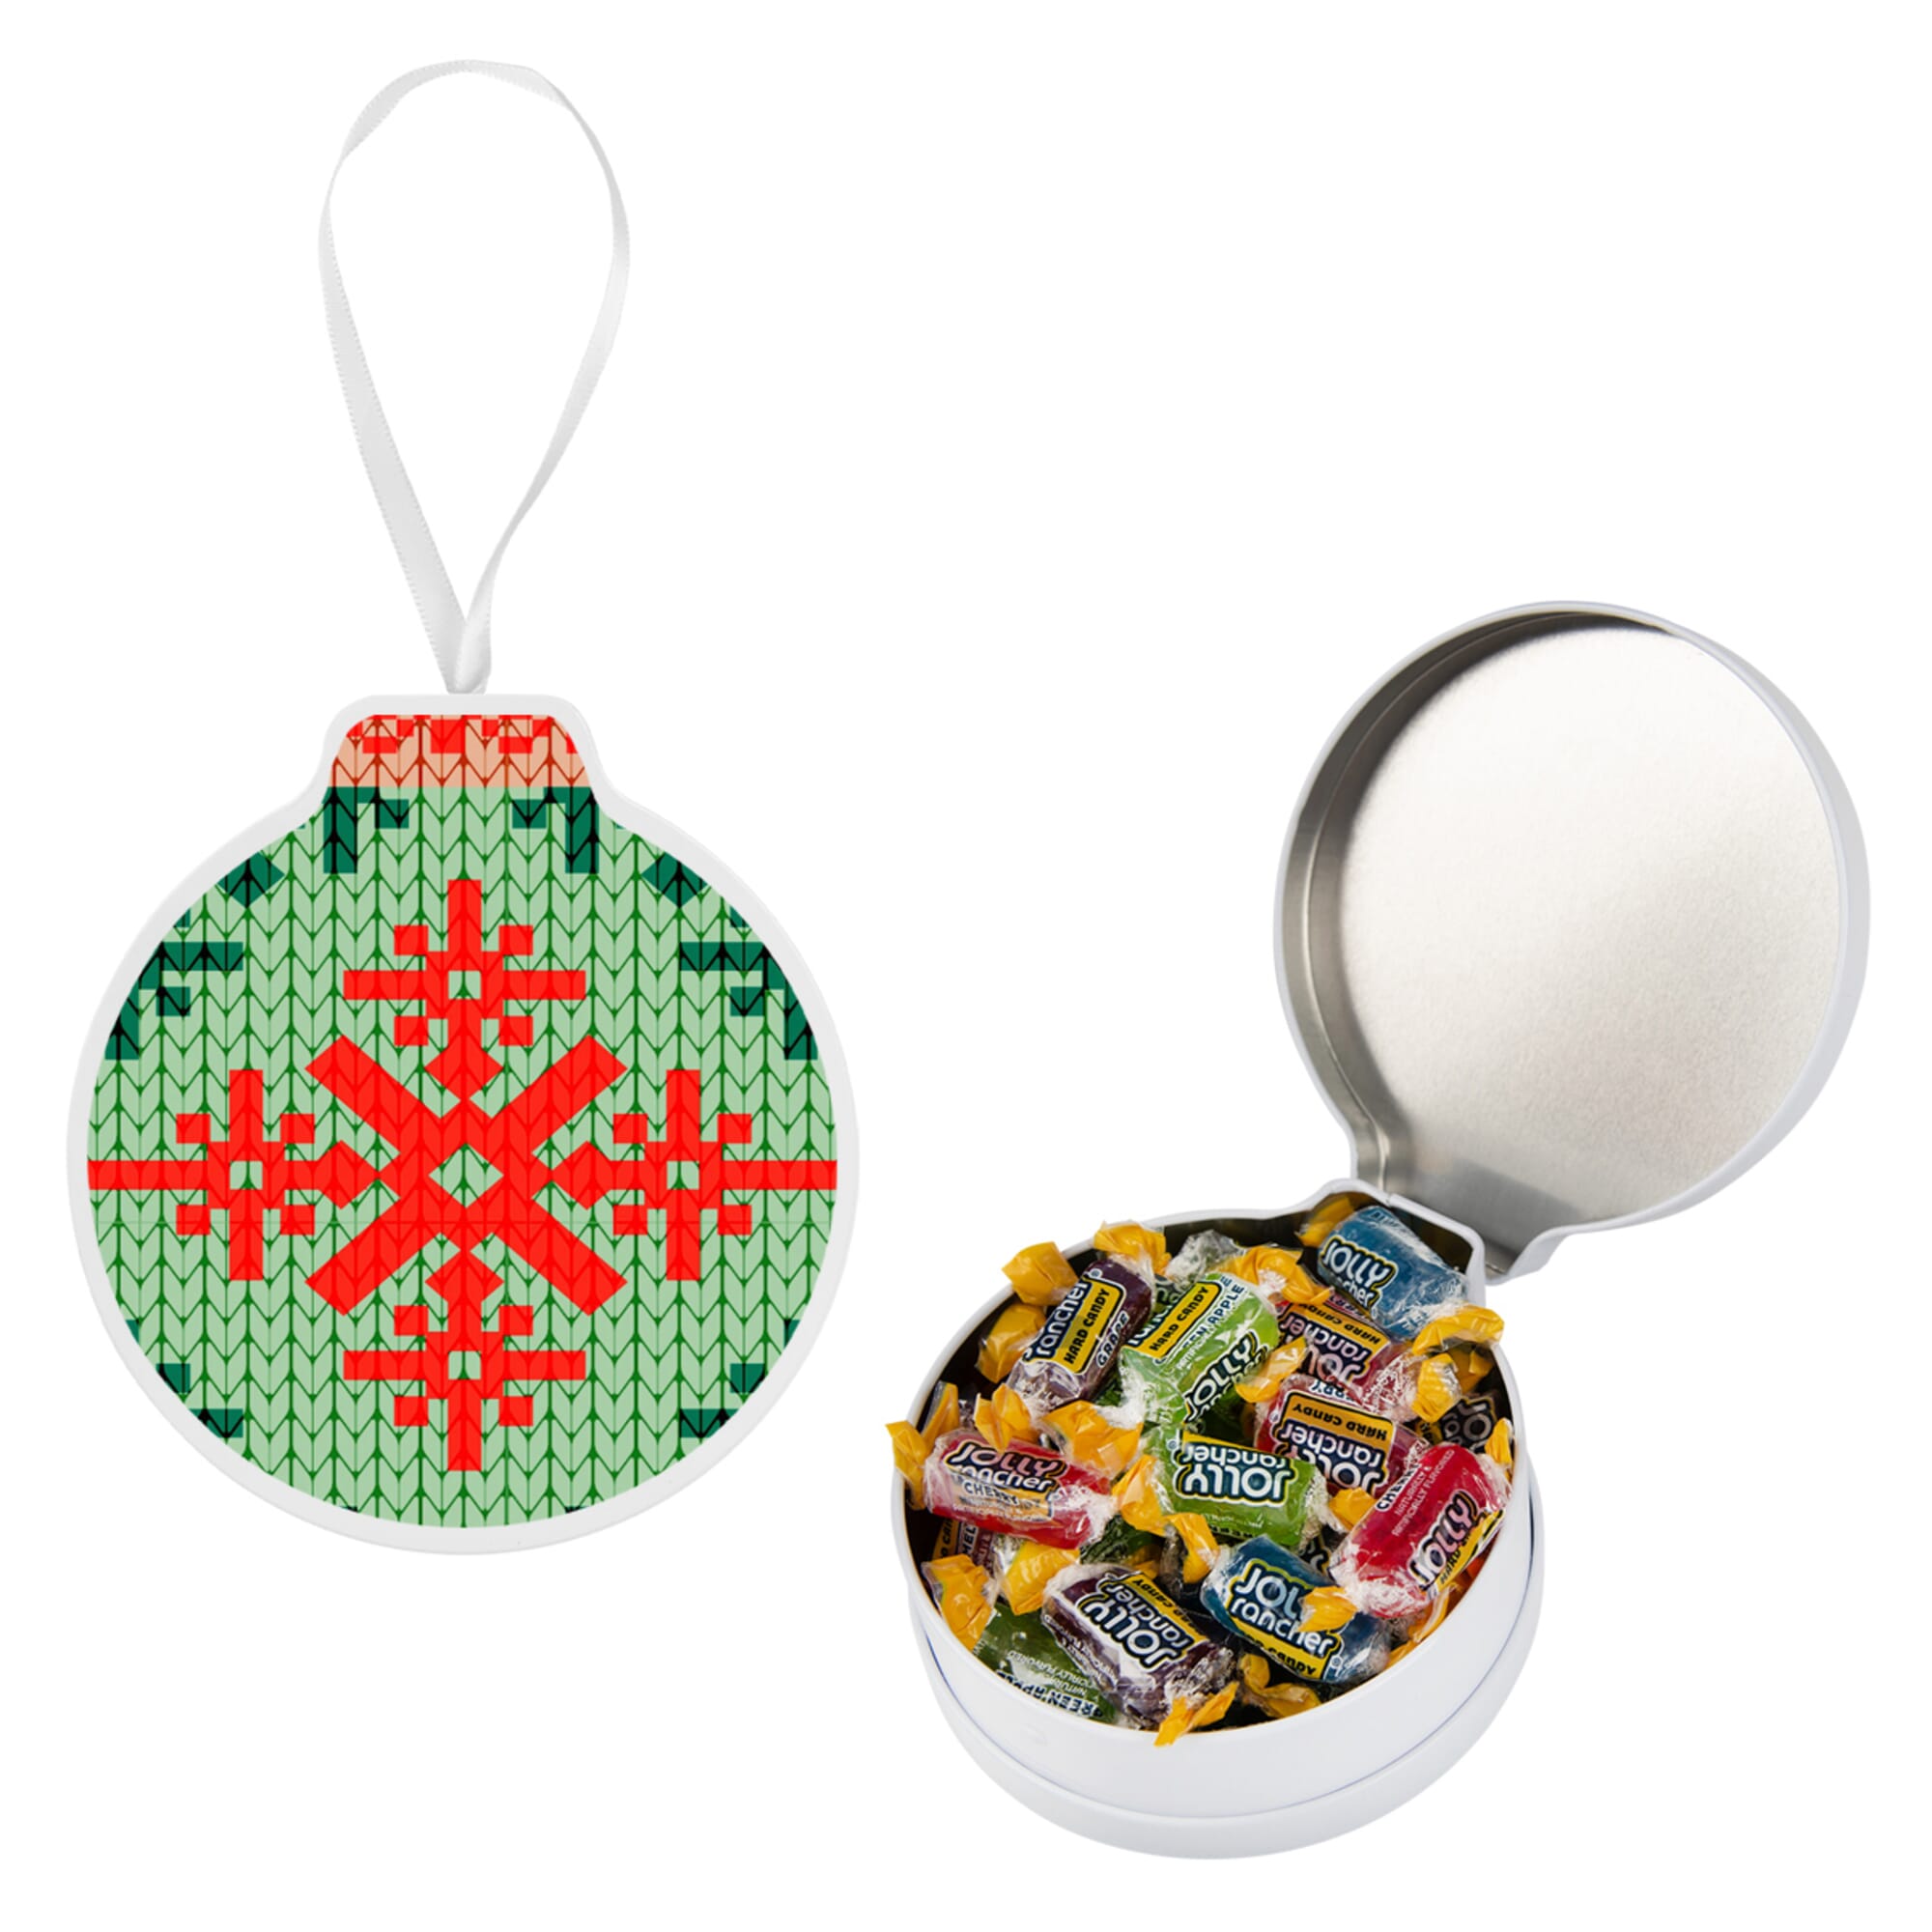 FULL COLOR ORNAMENT TIN WITH CANDY